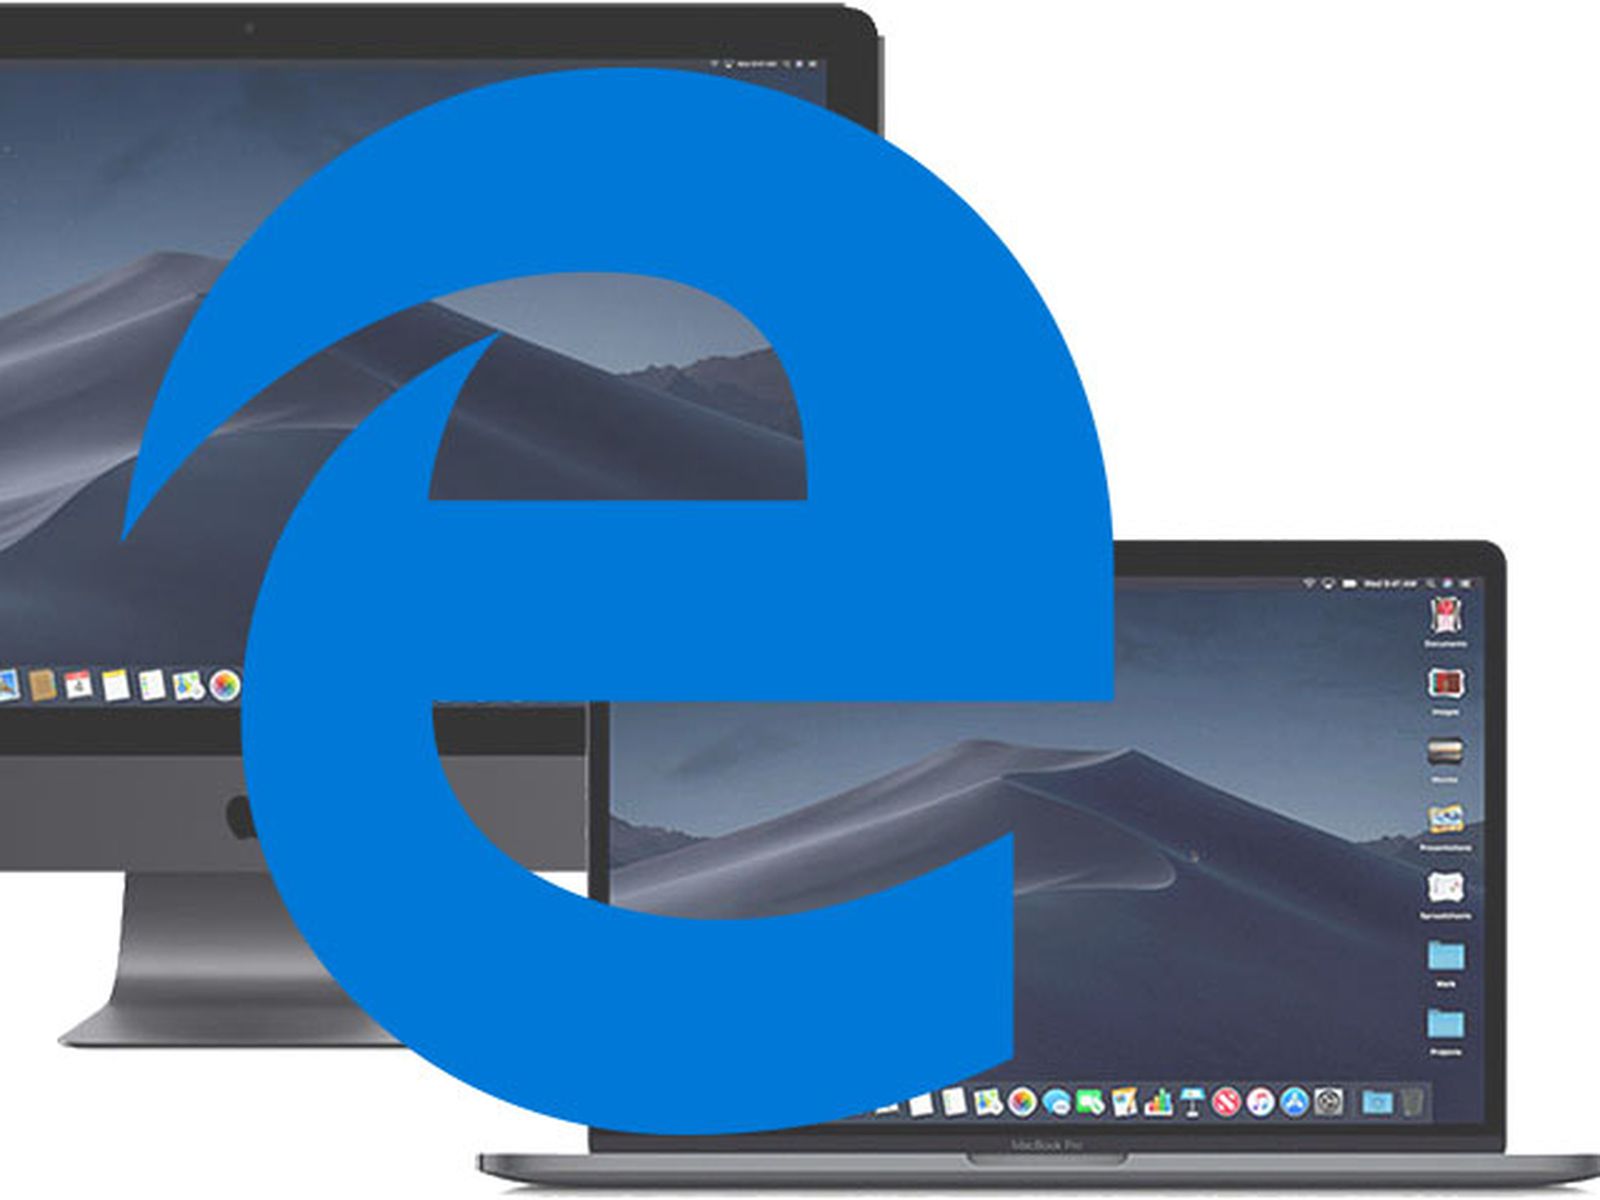 edge browser for the mac